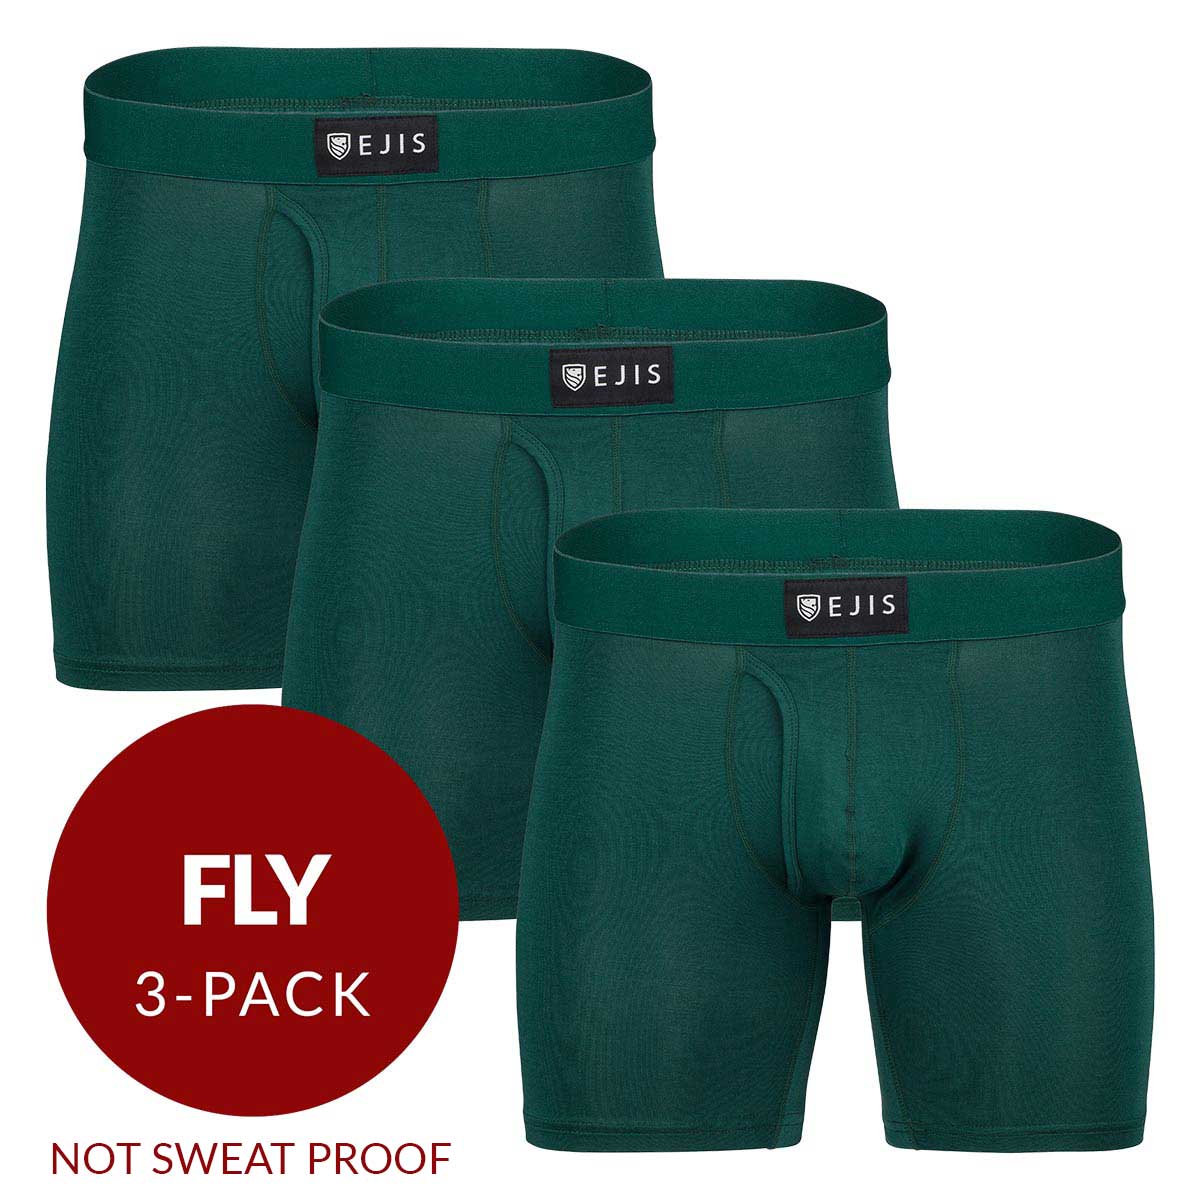 Essential Men's Boxer Briefs with Fly - Green 3-Pack